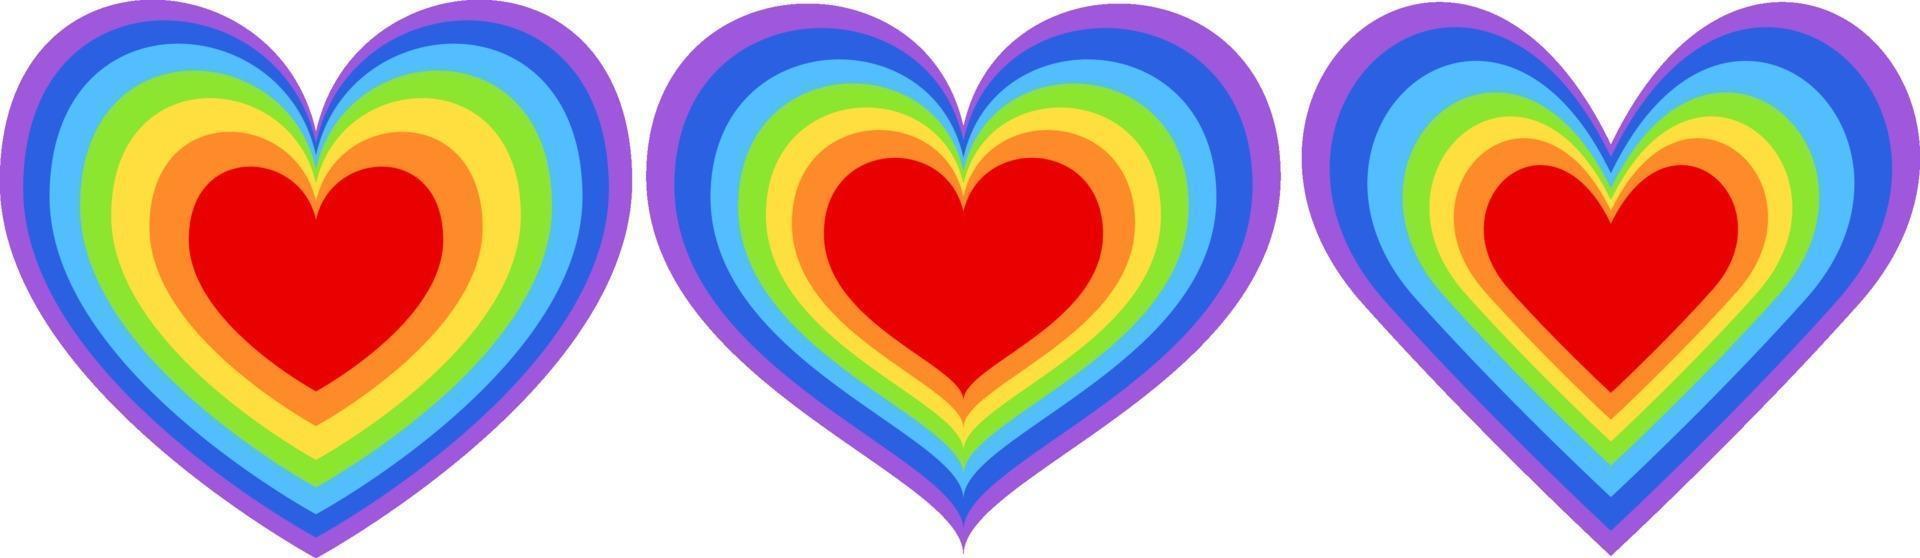 Set of different shapes of rainbow heart vector